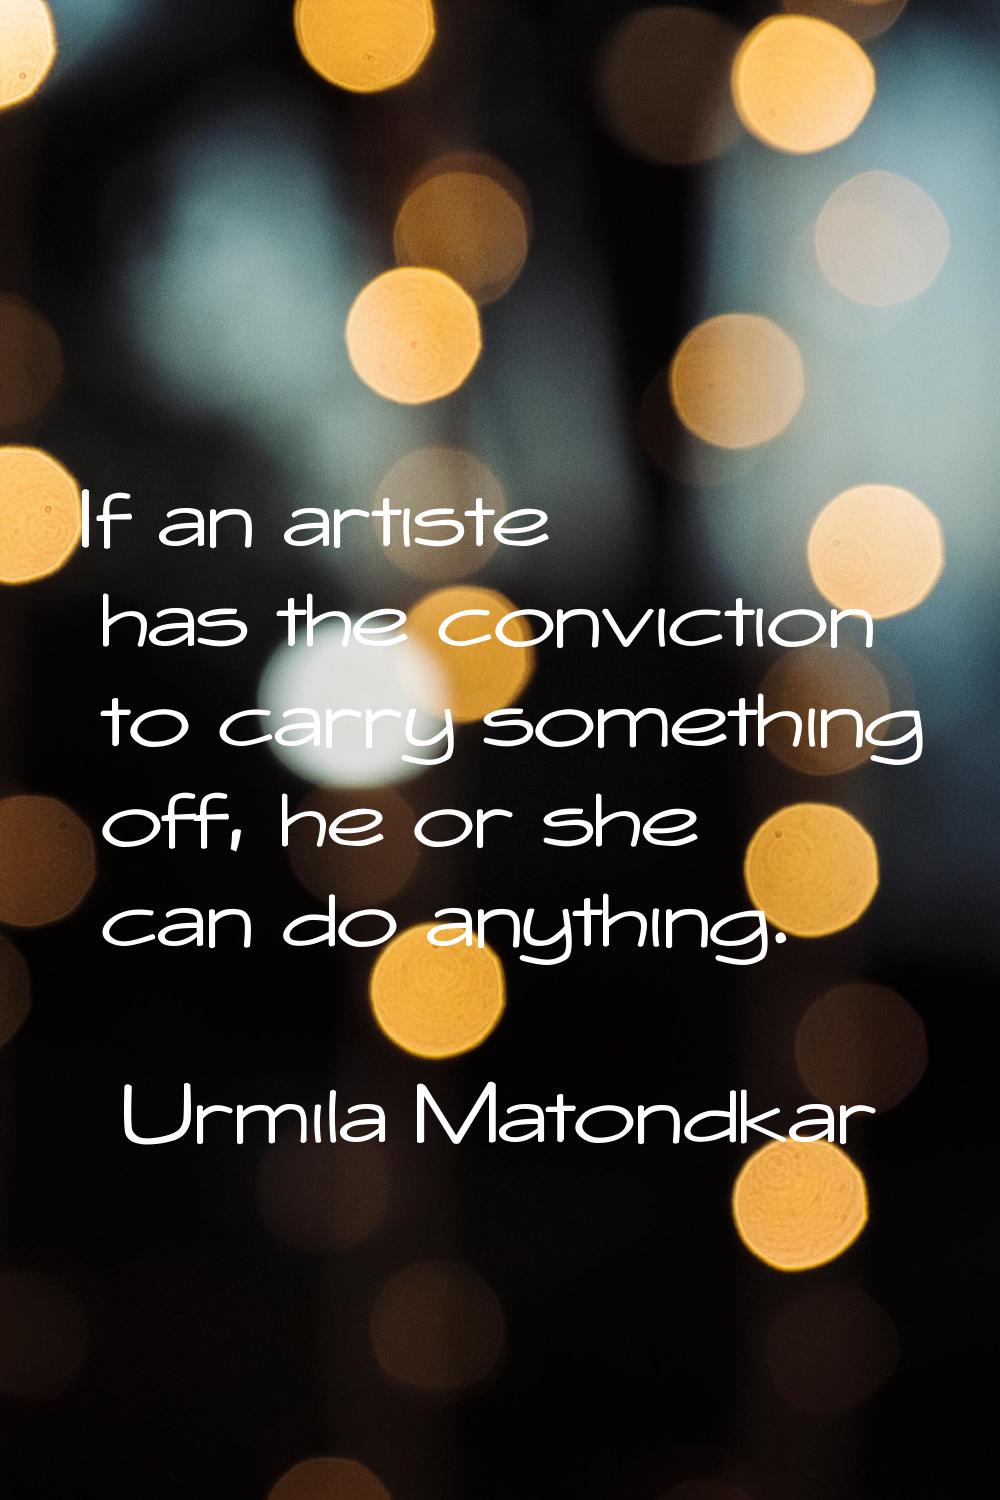 If an artiste has the conviction to carry something off, he or she can do anything.